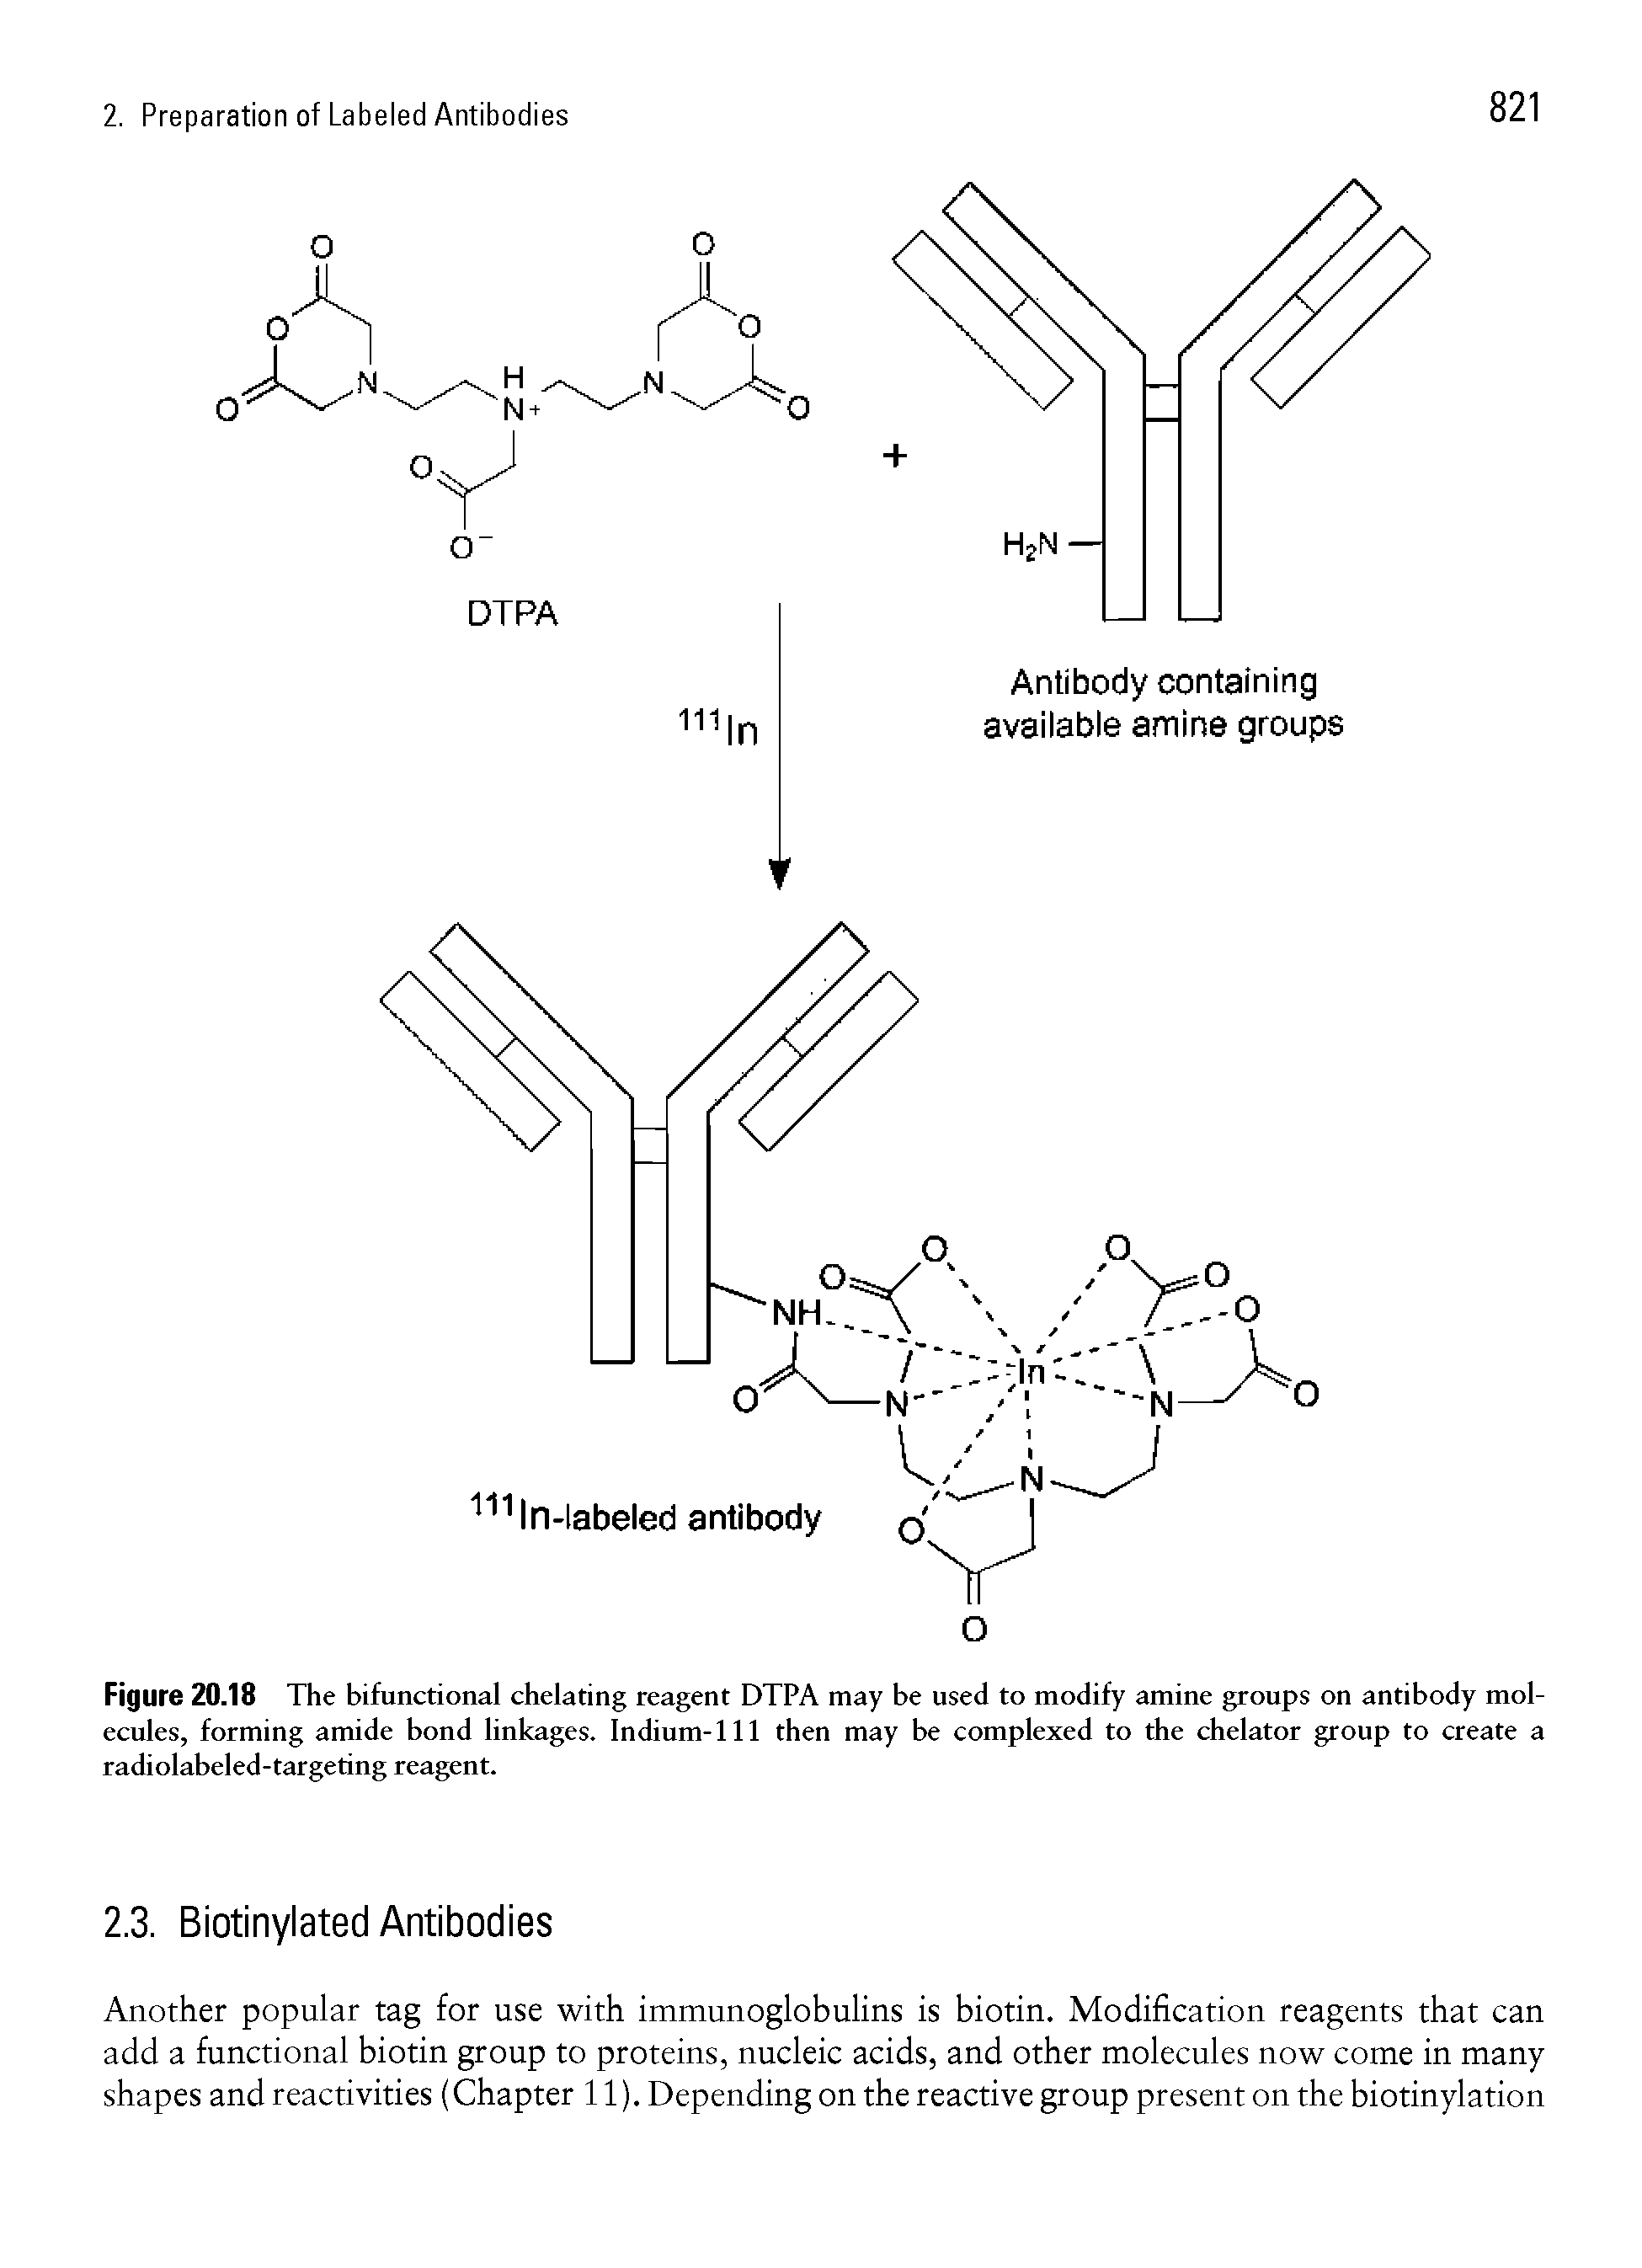 Figure 20.18 The bifunctional chelating reagent DTPA may be used to modify amine groups on antibody molecules, forming amide bond linkages. Indium-111 then may be complexed to the chelator group to create a radiolabeled-targeting reagent.